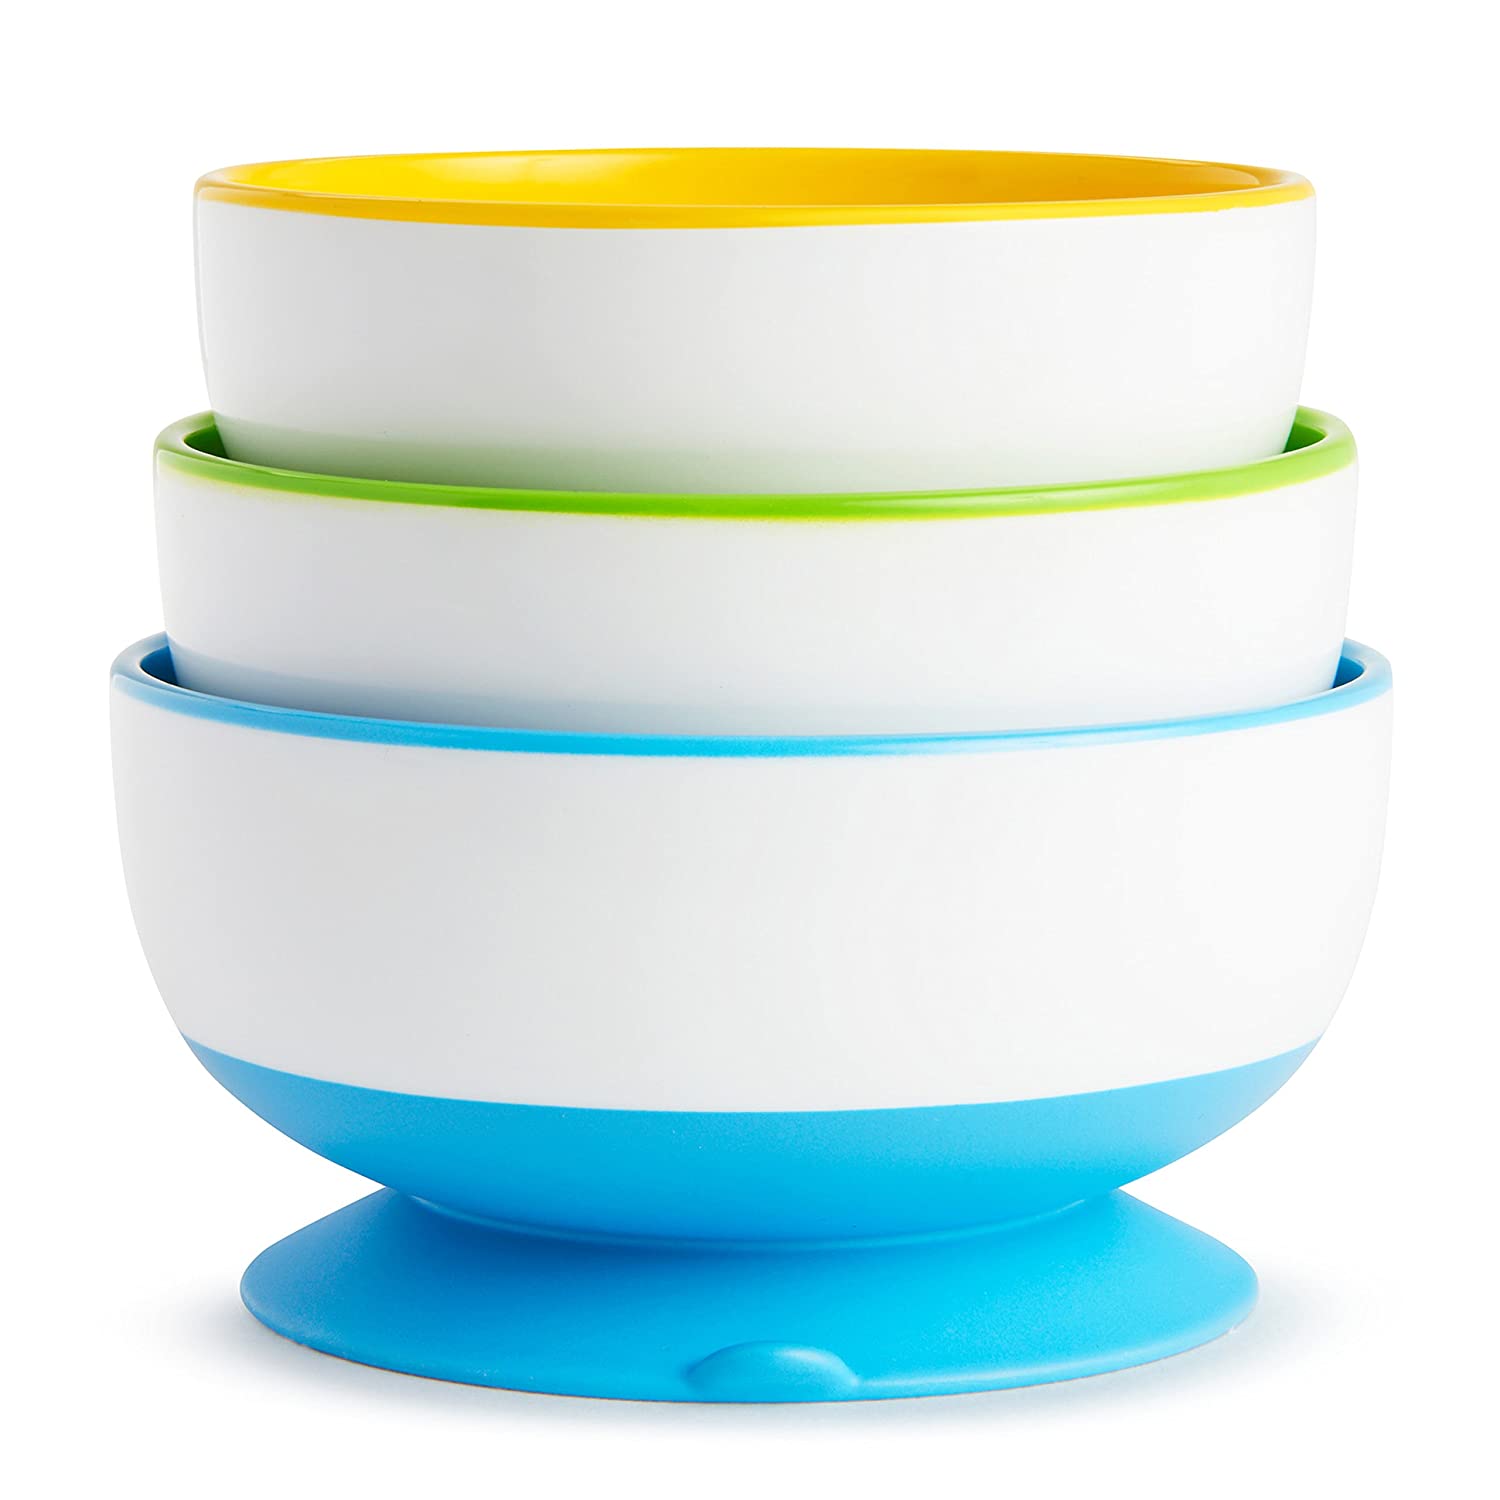 9 Best Baby Bowls and Plates 2022 - Buying Guide 1